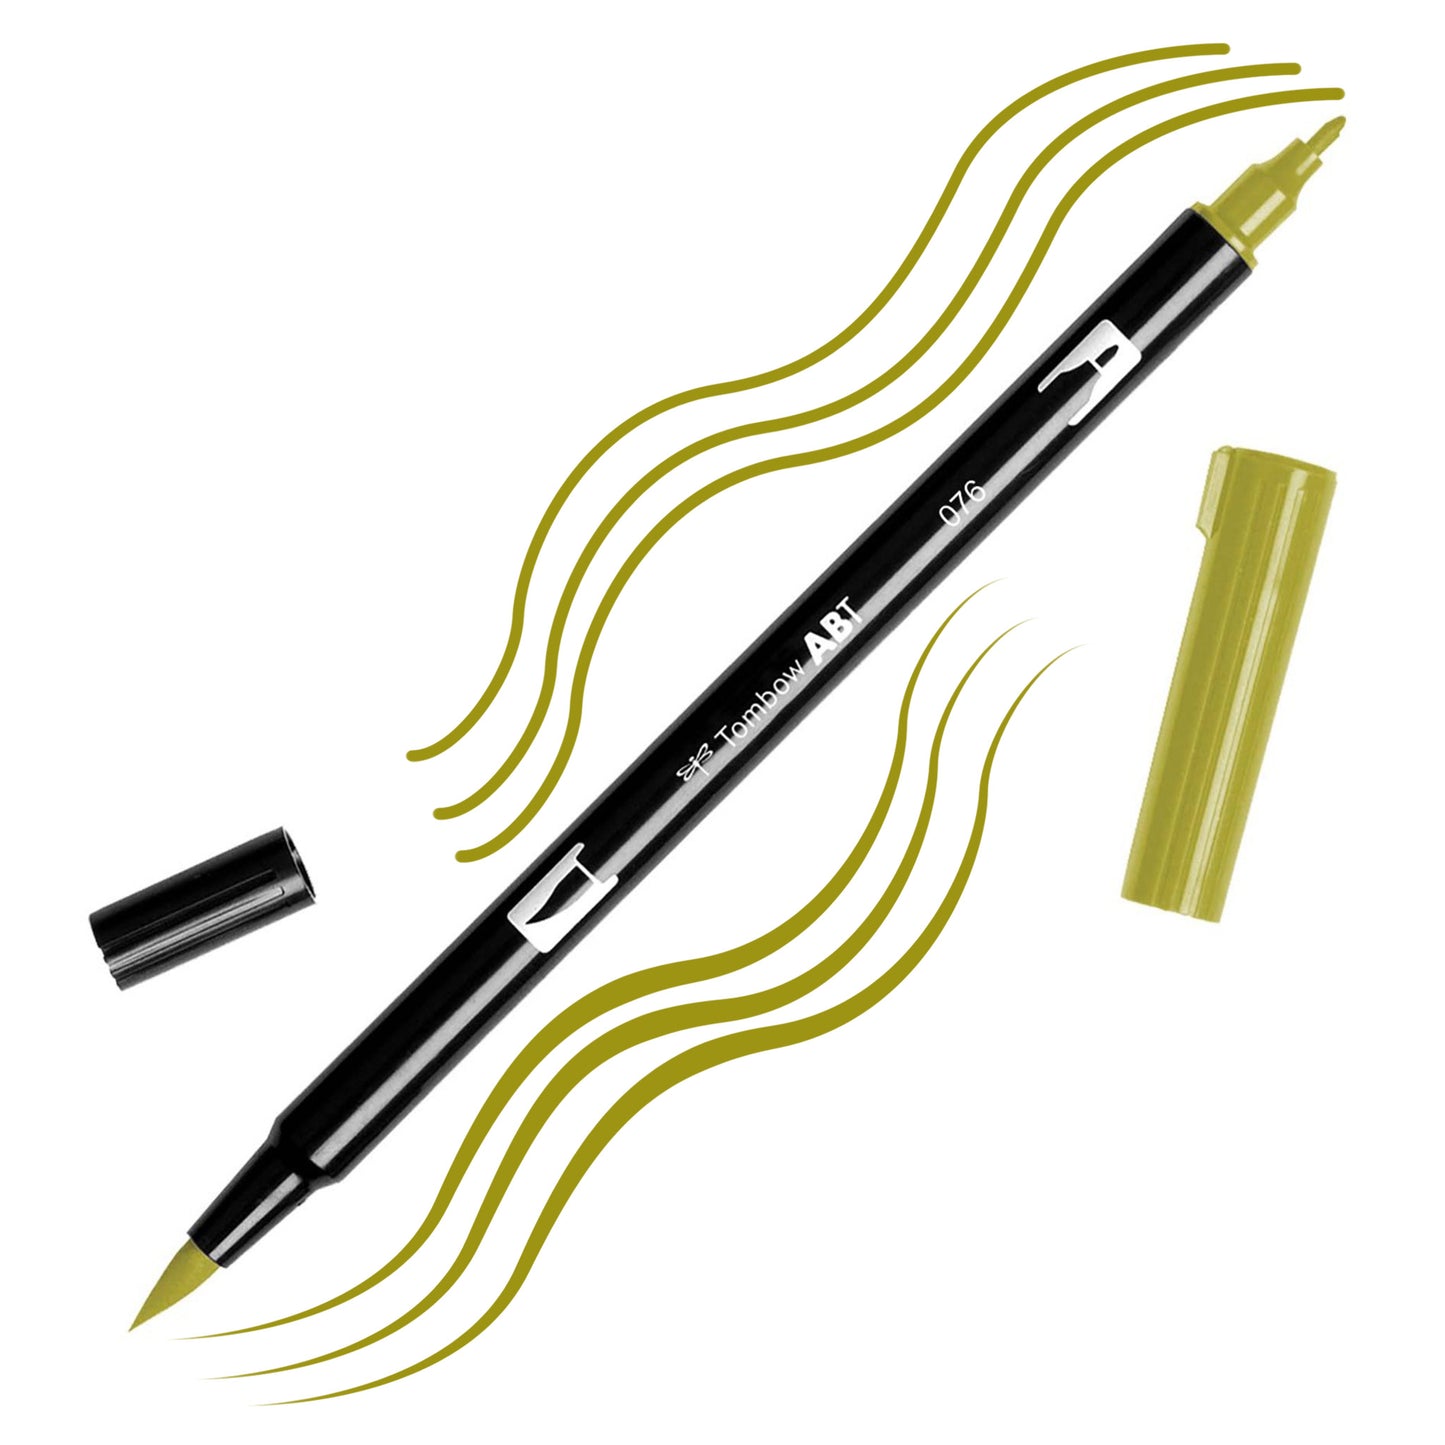 Green Ochre Tombow double-headed brush-pen with a flexible nylon fiber brush tip and a fine tip against a white background with Green Ochre strokes